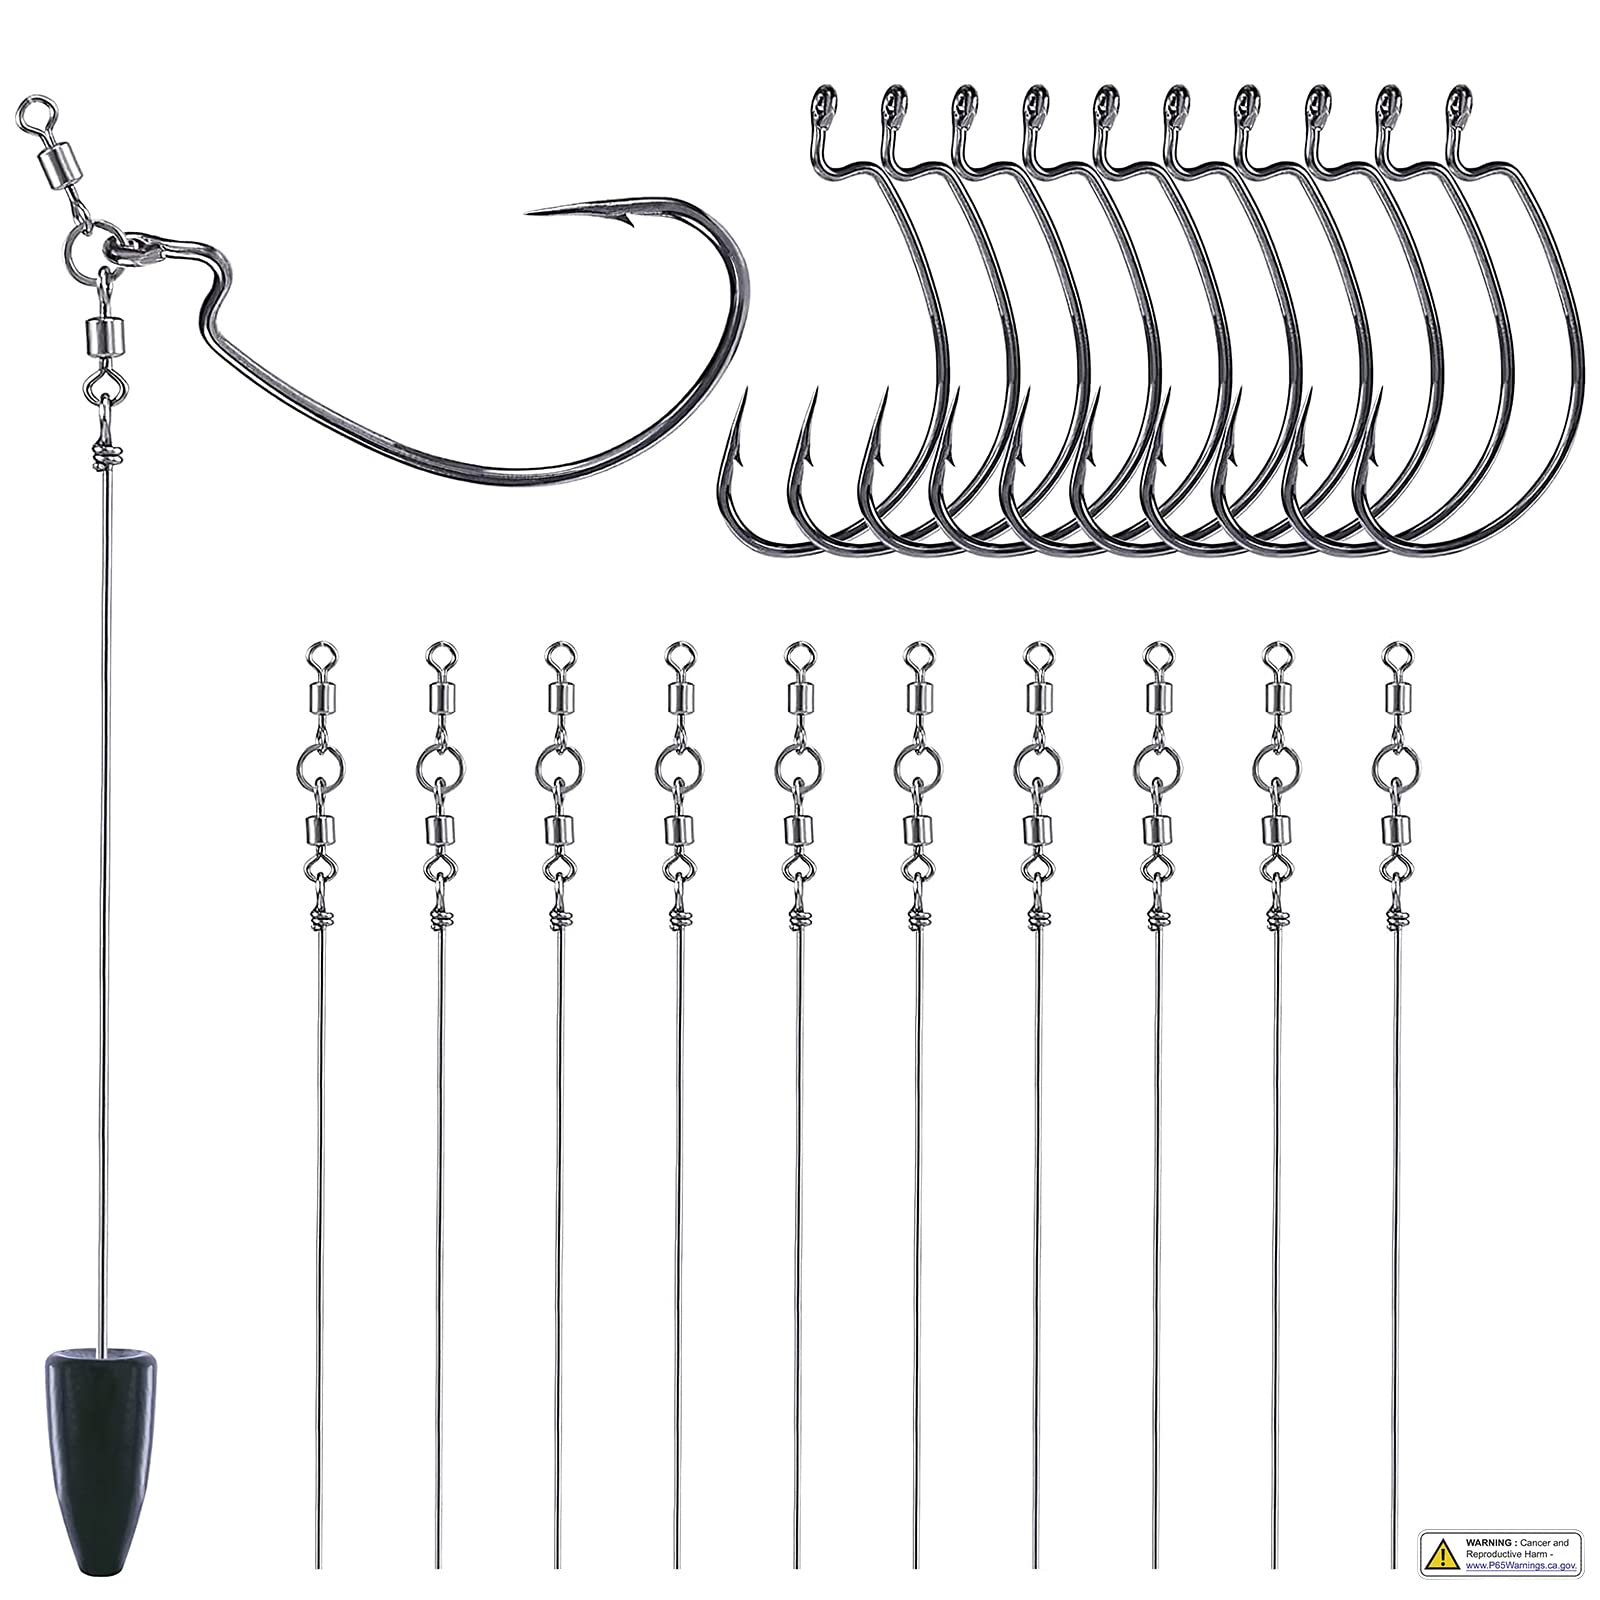 PLUSINNO Fishing Accessories Kit, Fishing Tackle Kit with Tackle